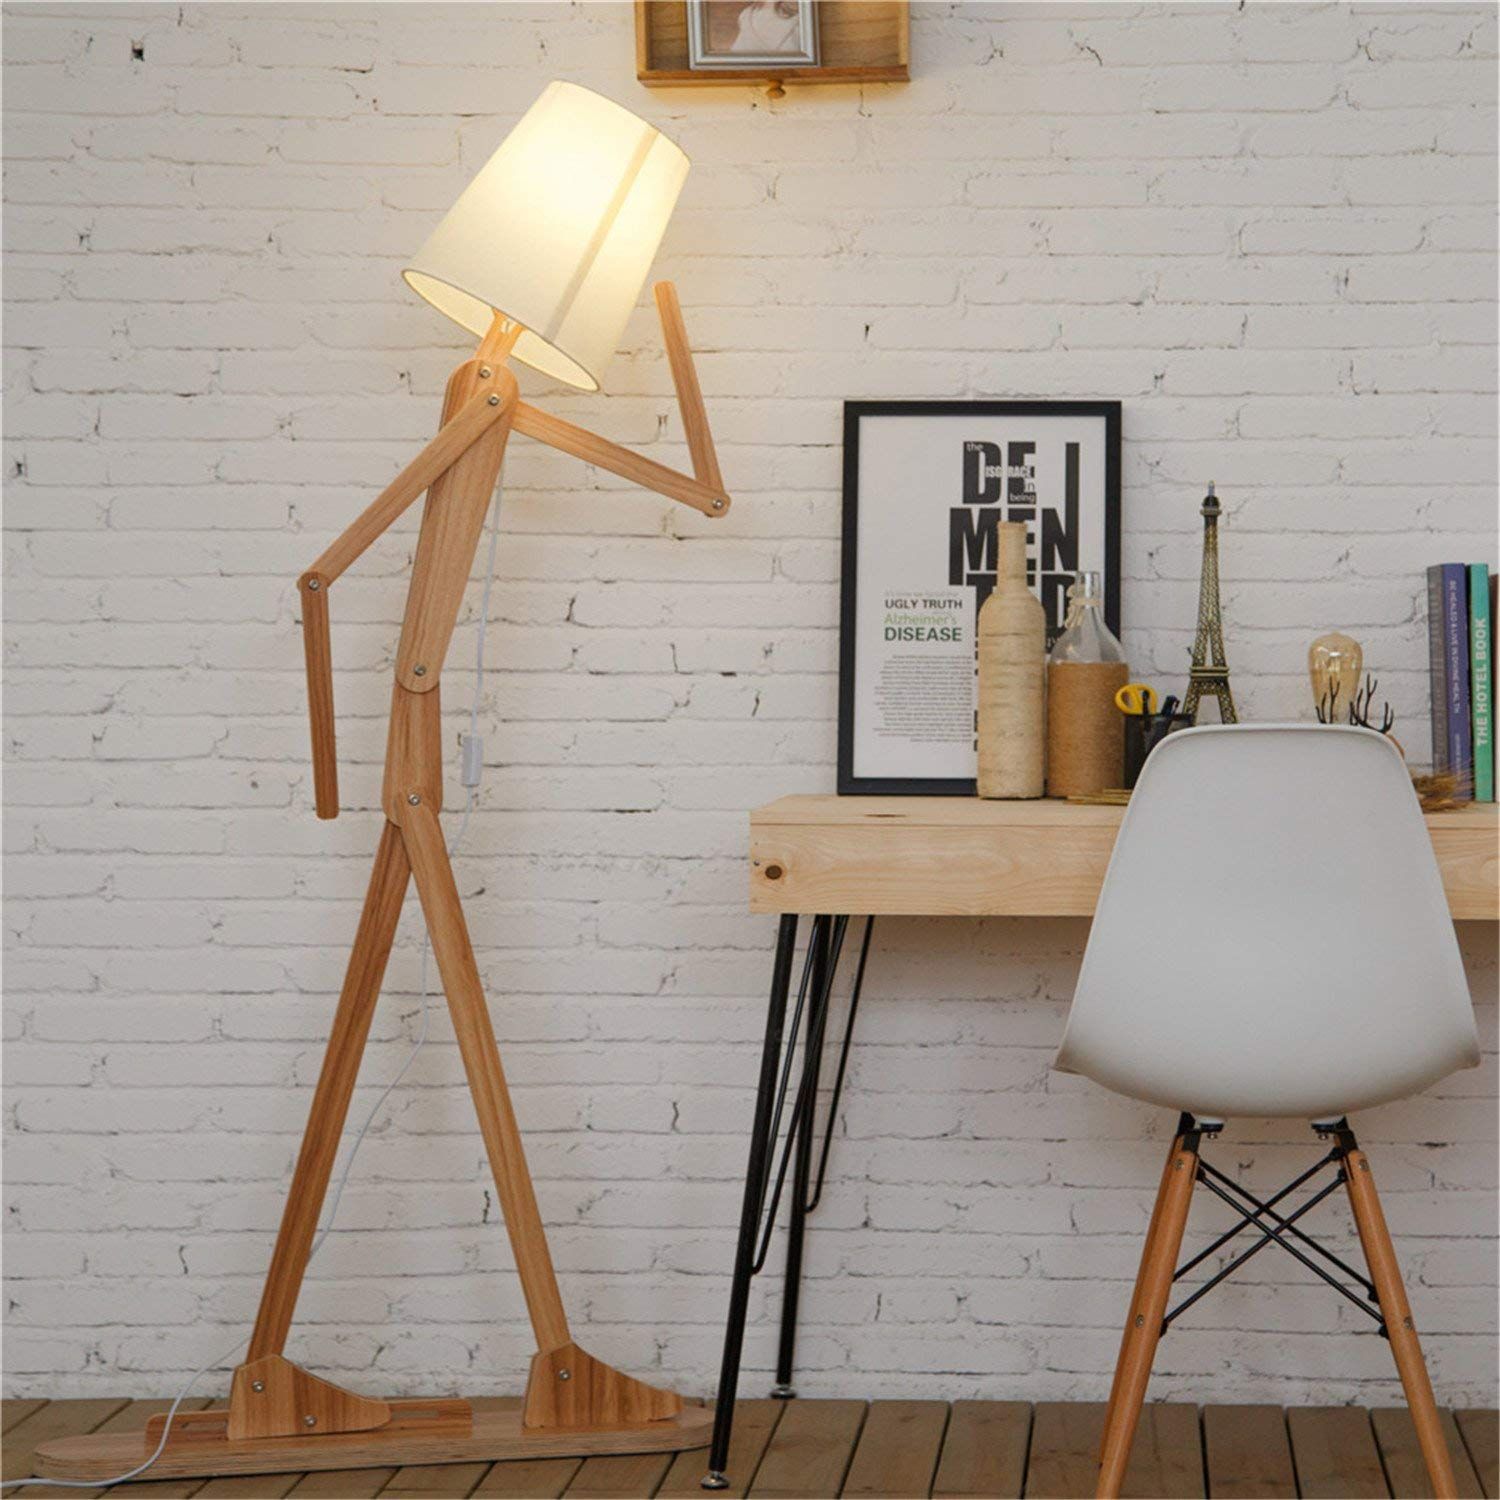 12 Quirky Lamps Under $300 That Will Brighten Up Your Home | Hunker - 12 Quirky Lamps Under $300 That Will Brighten Up Your Home | Hunker -   19 diy Lamp modern ideas